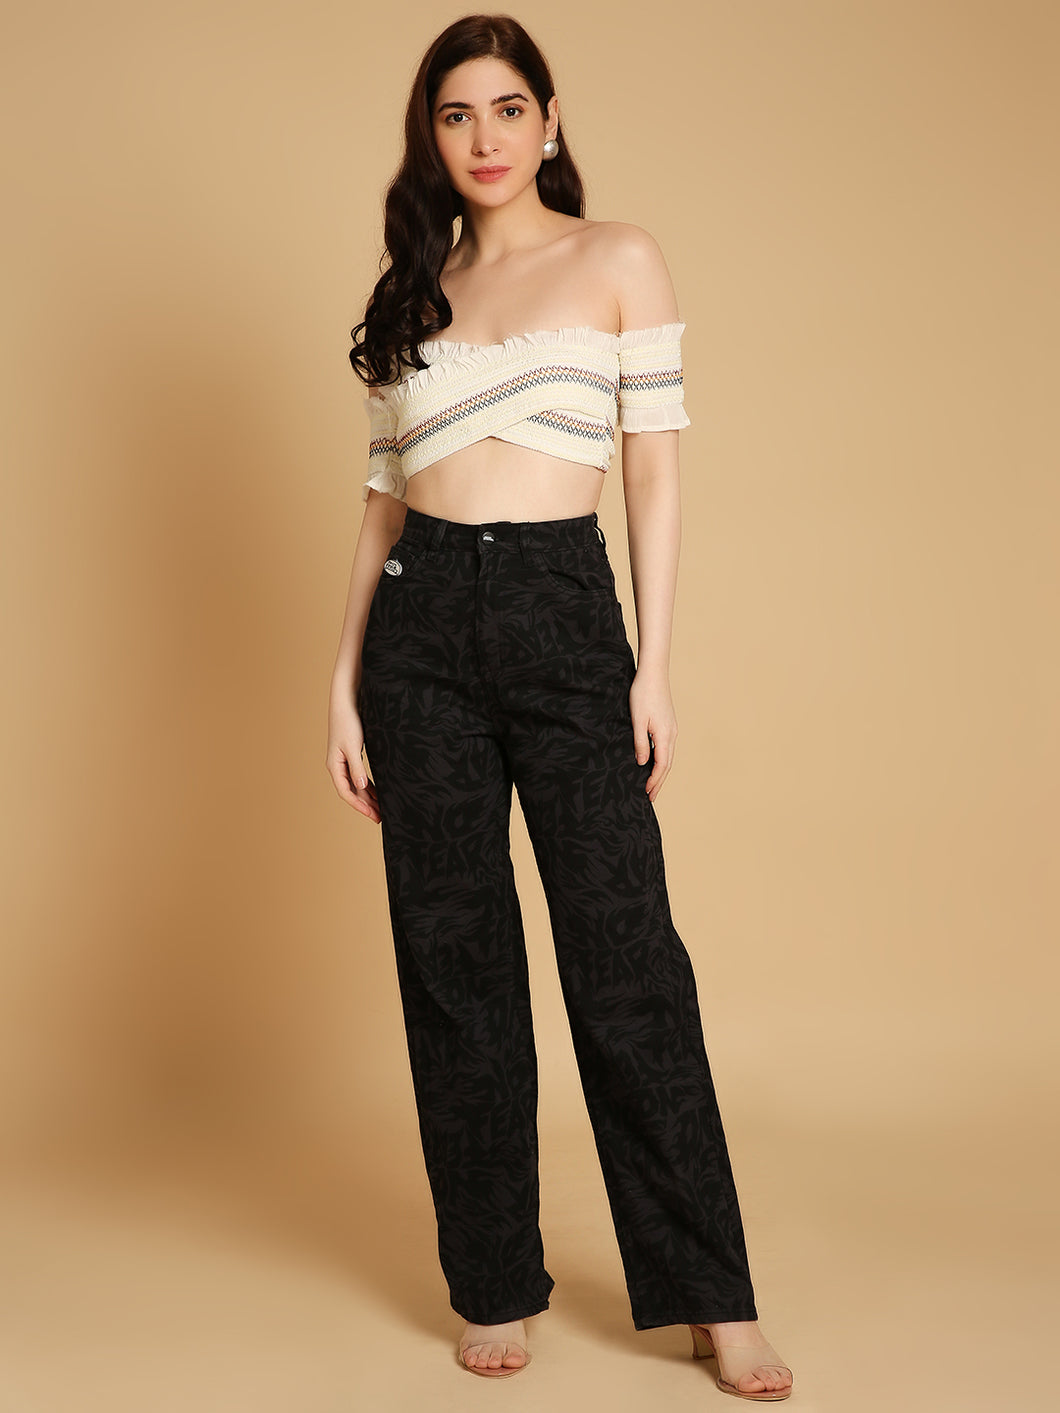 Chic Moments Crop Top